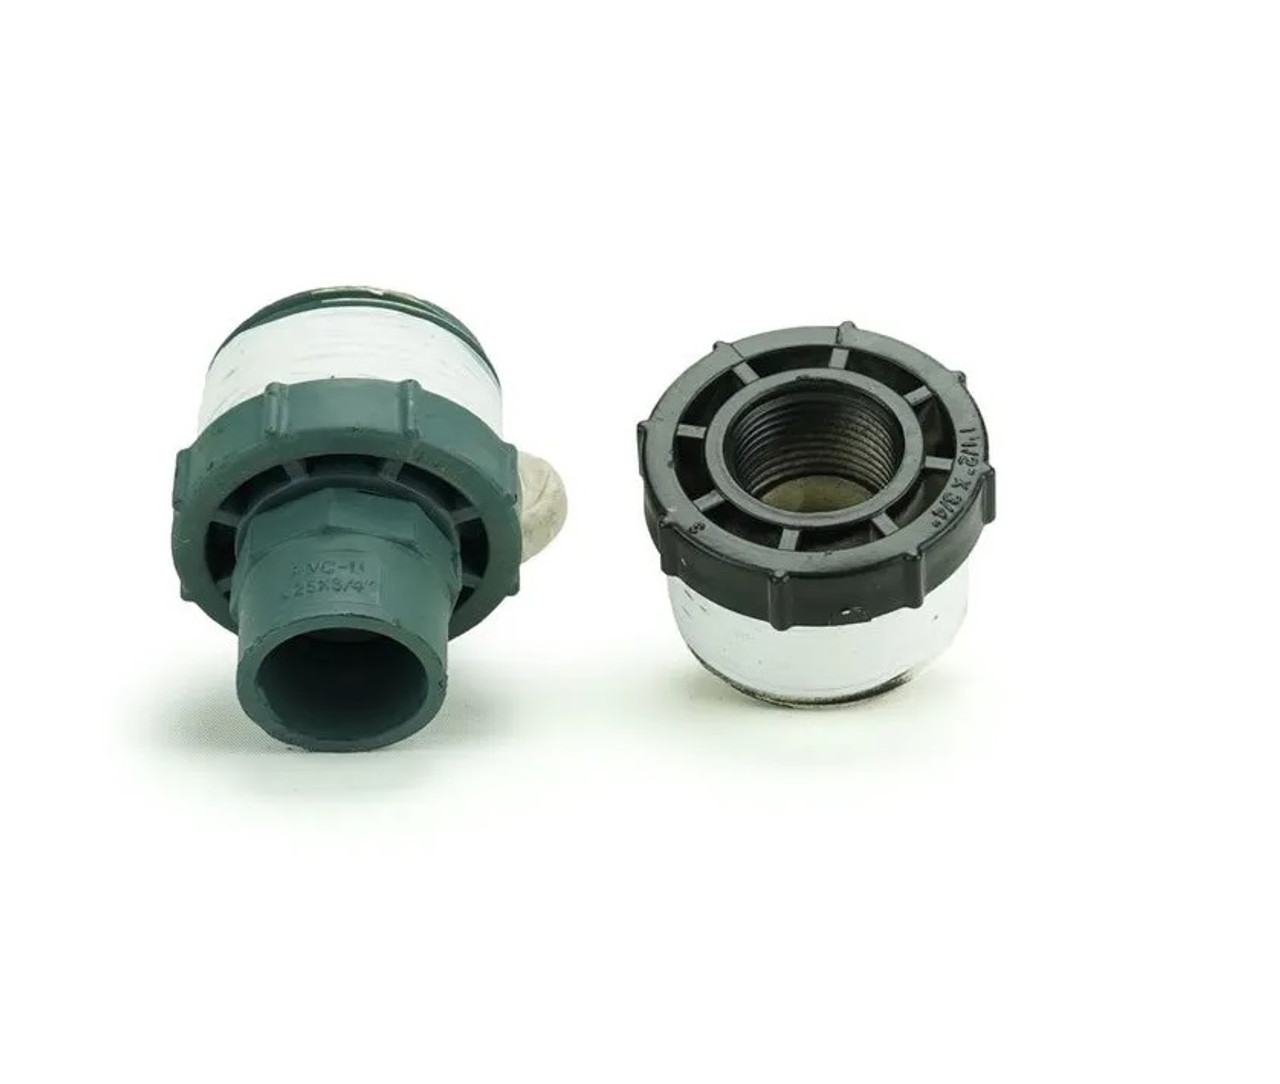 Aquascape Replacement Threaded Fittings For Spillway Bowl and Basin